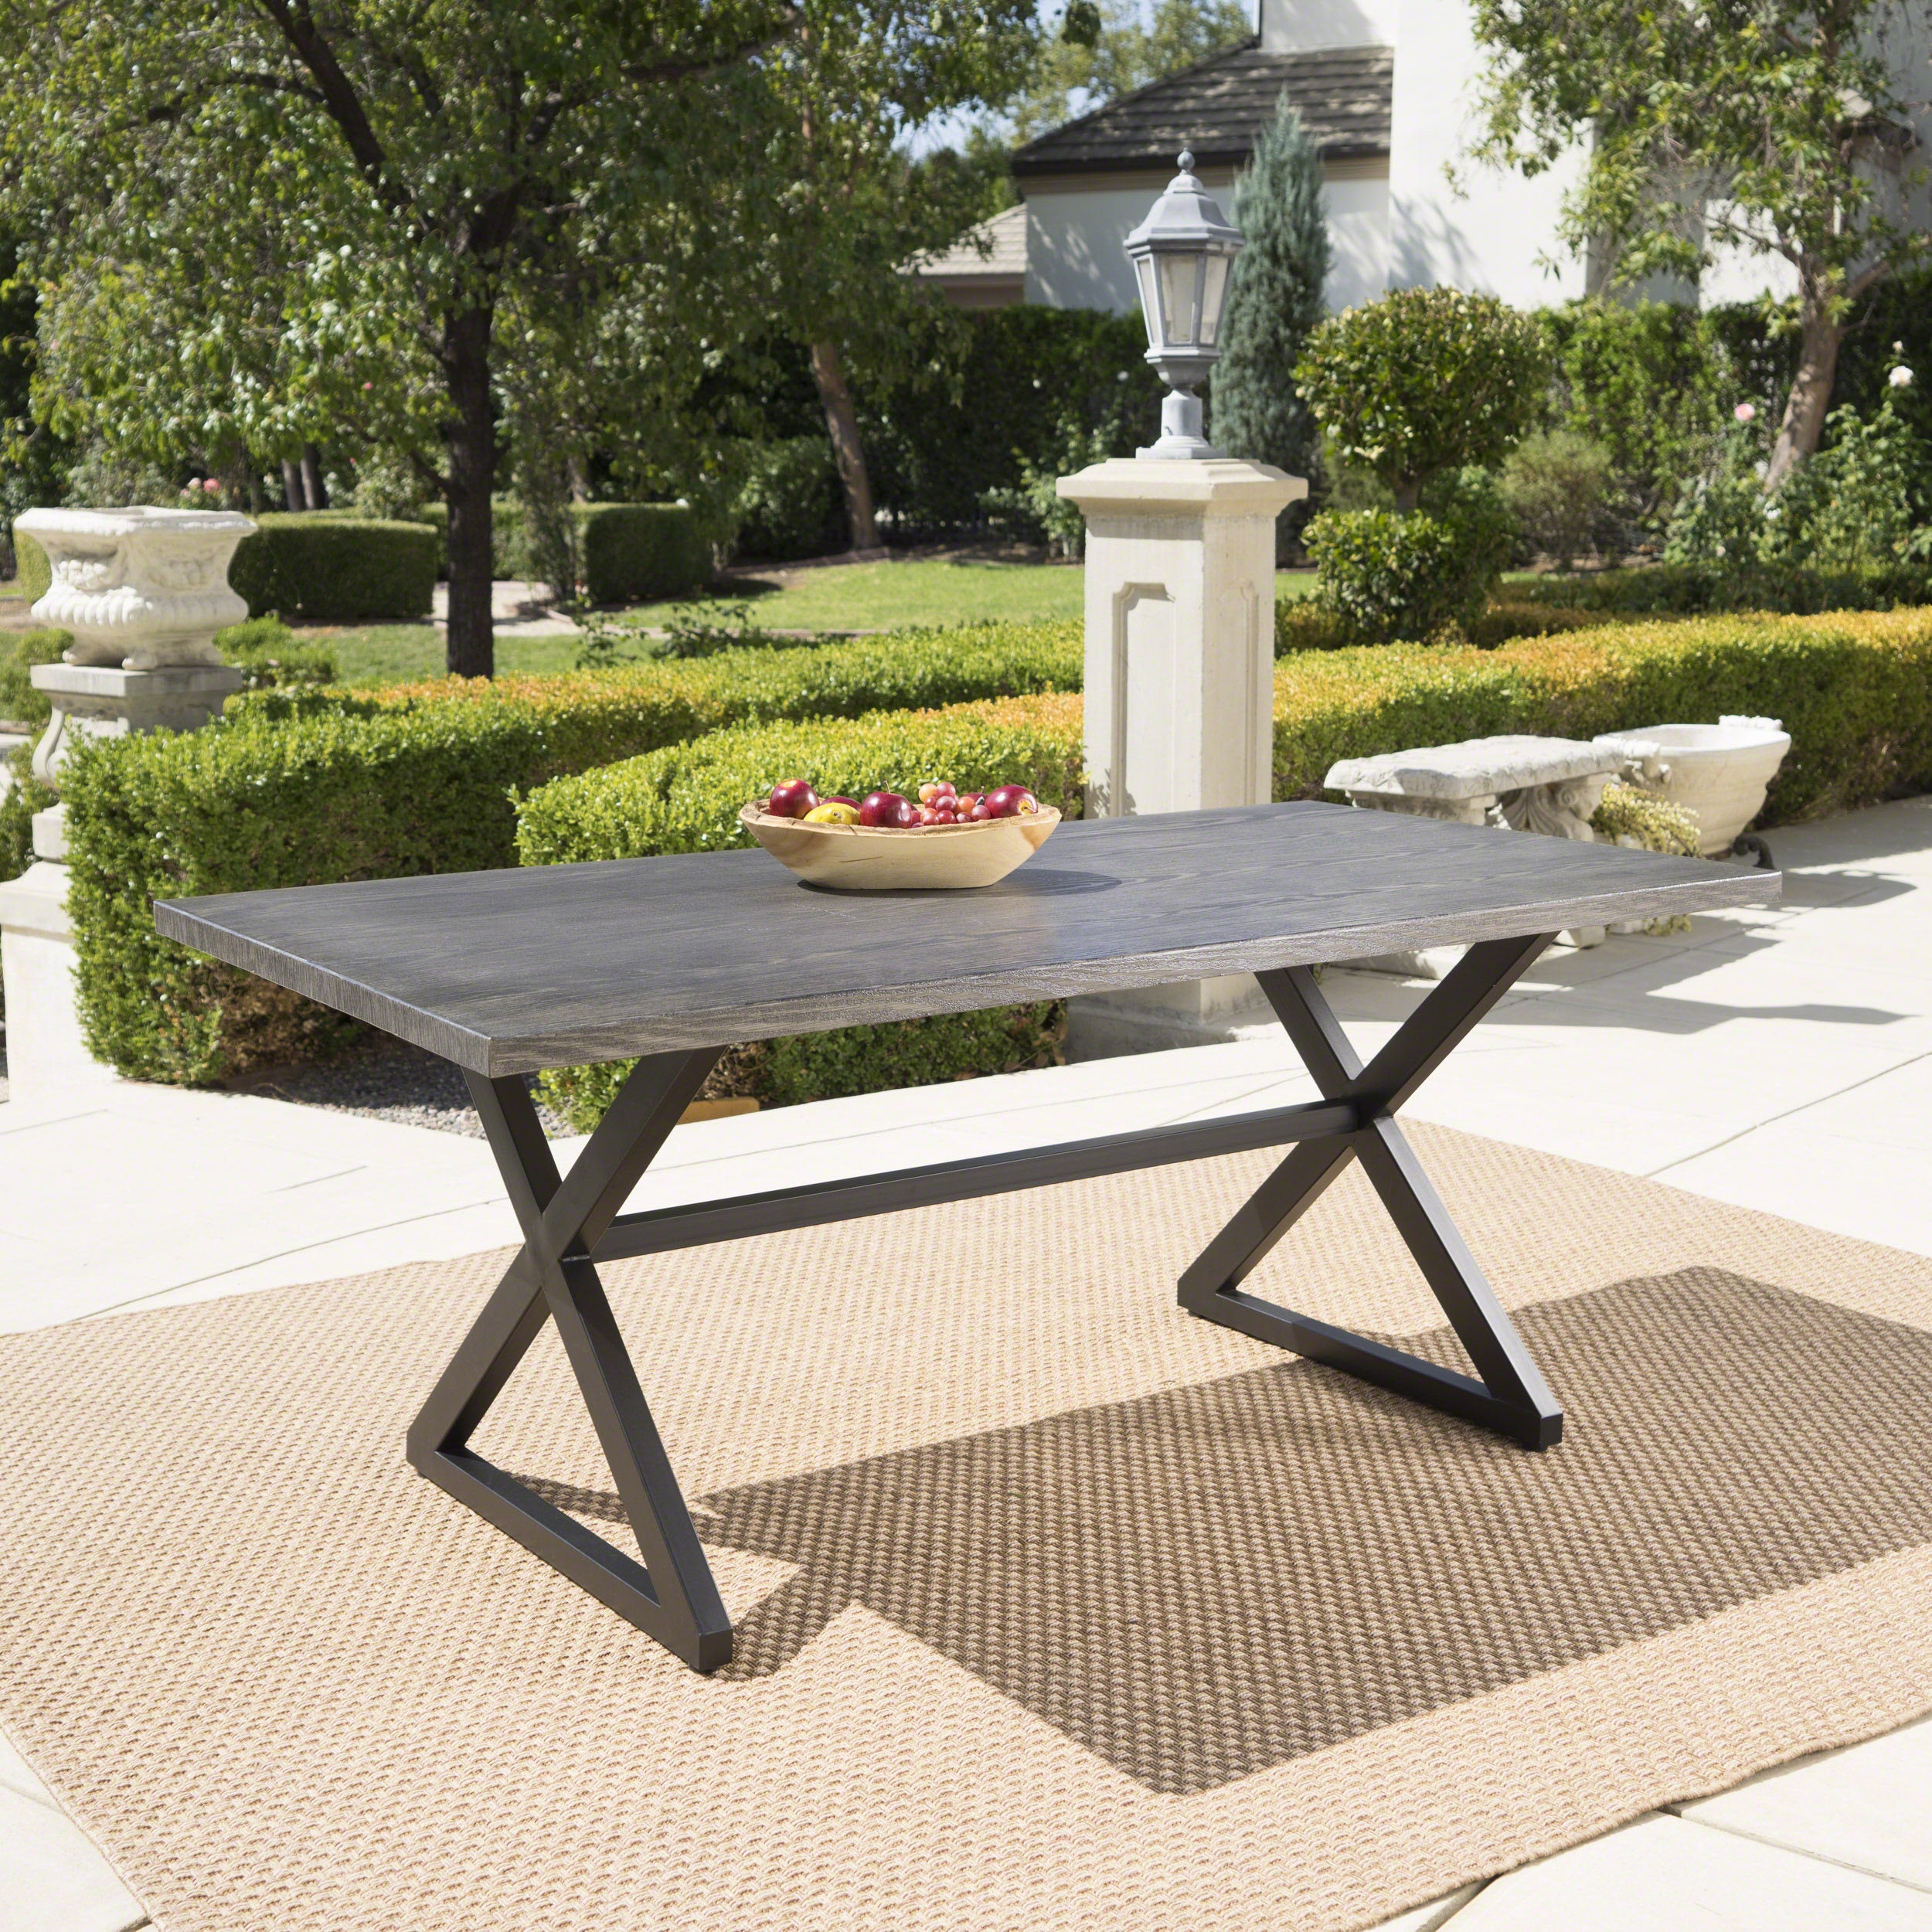 Tm-Outdoor-Aluminum-Dining-Table-with-Steel-Frame-Kitchen-&-Dining-Room-Tables